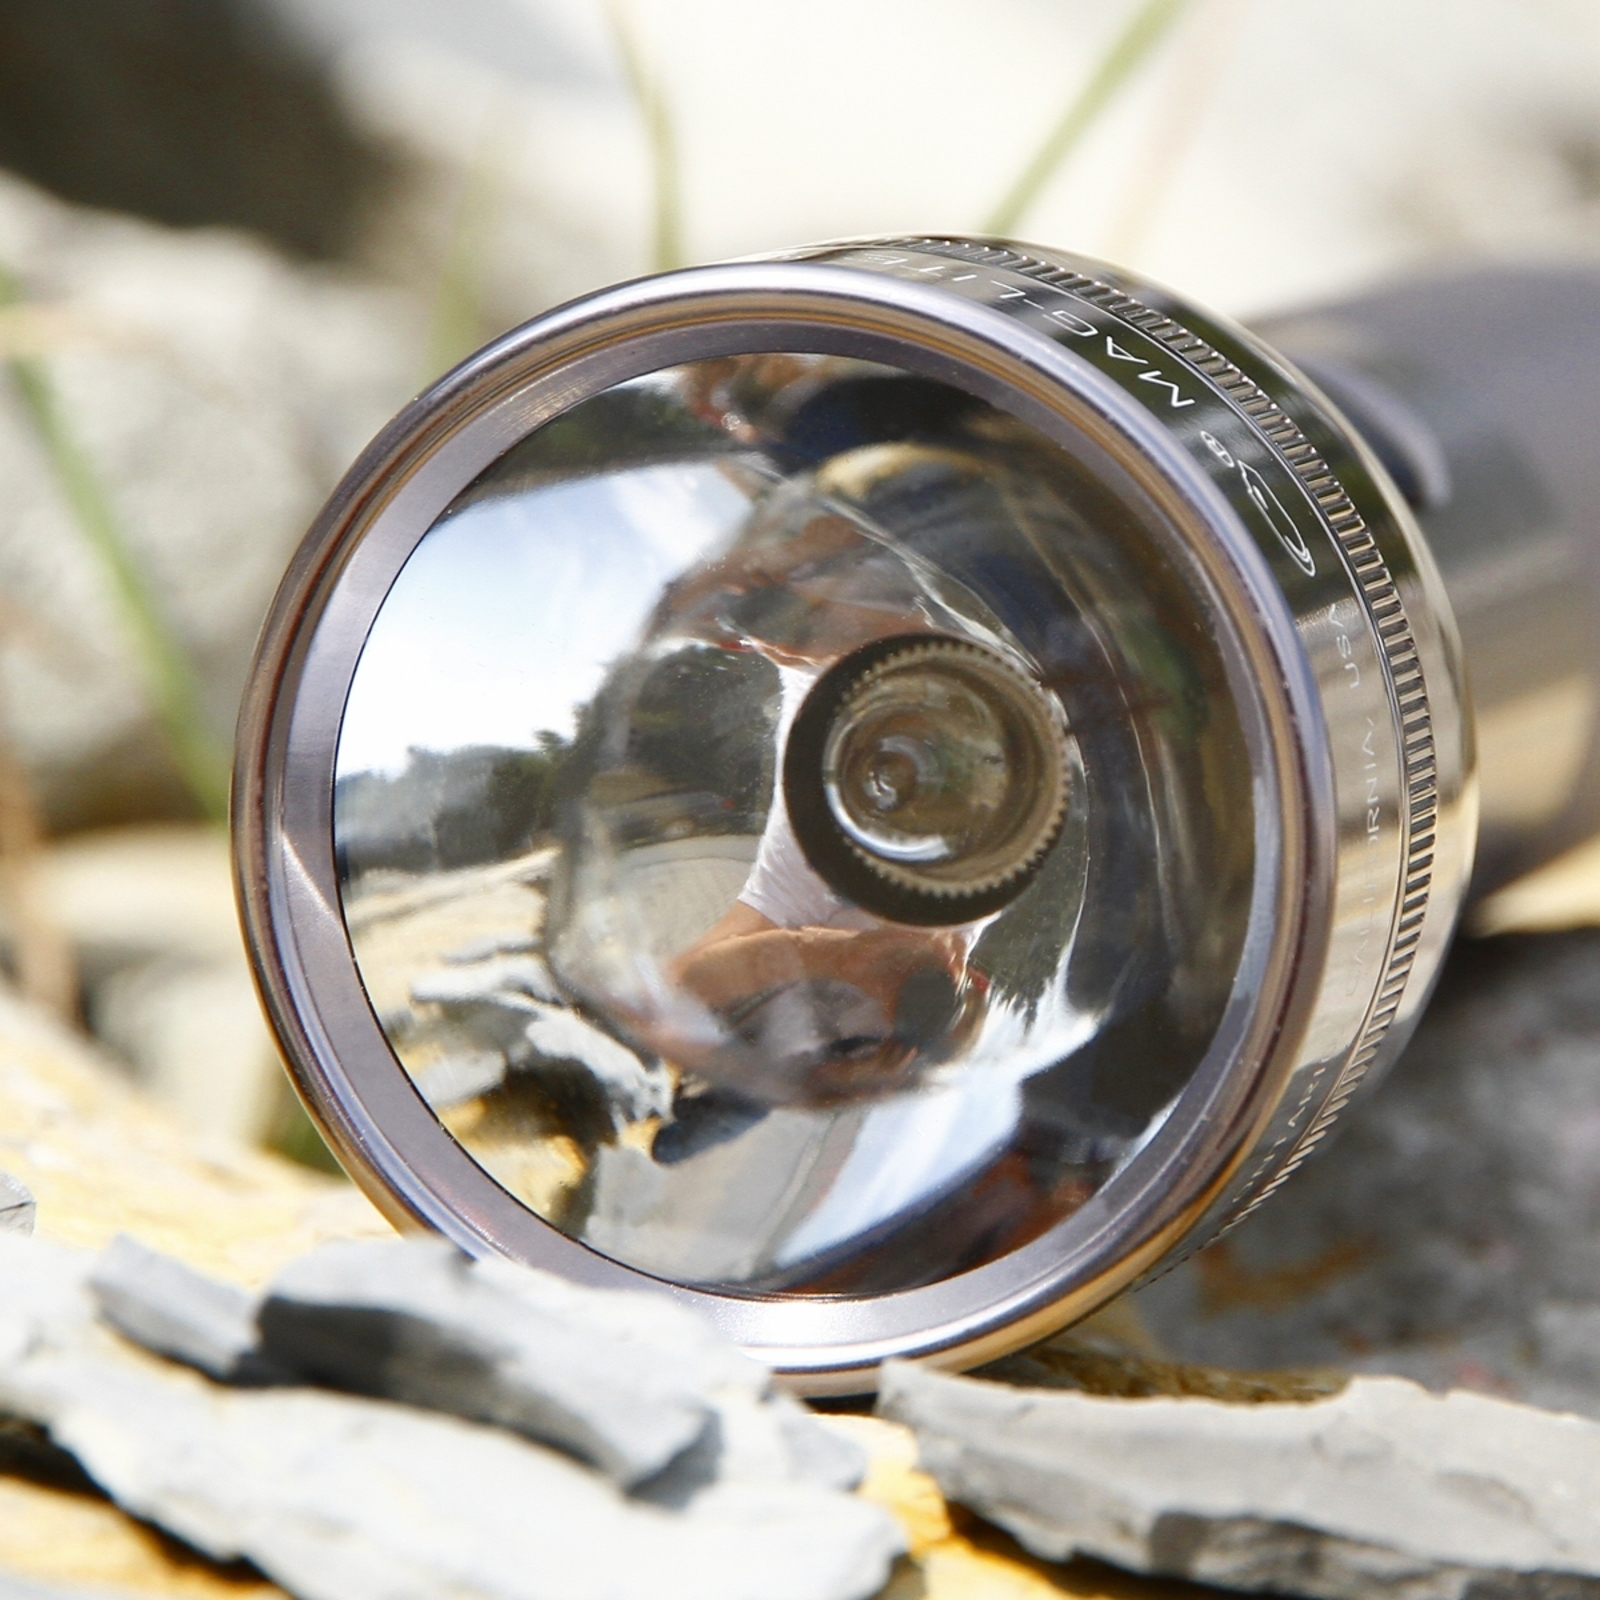 Functional Maglite torch 2 D-Cell, titanium